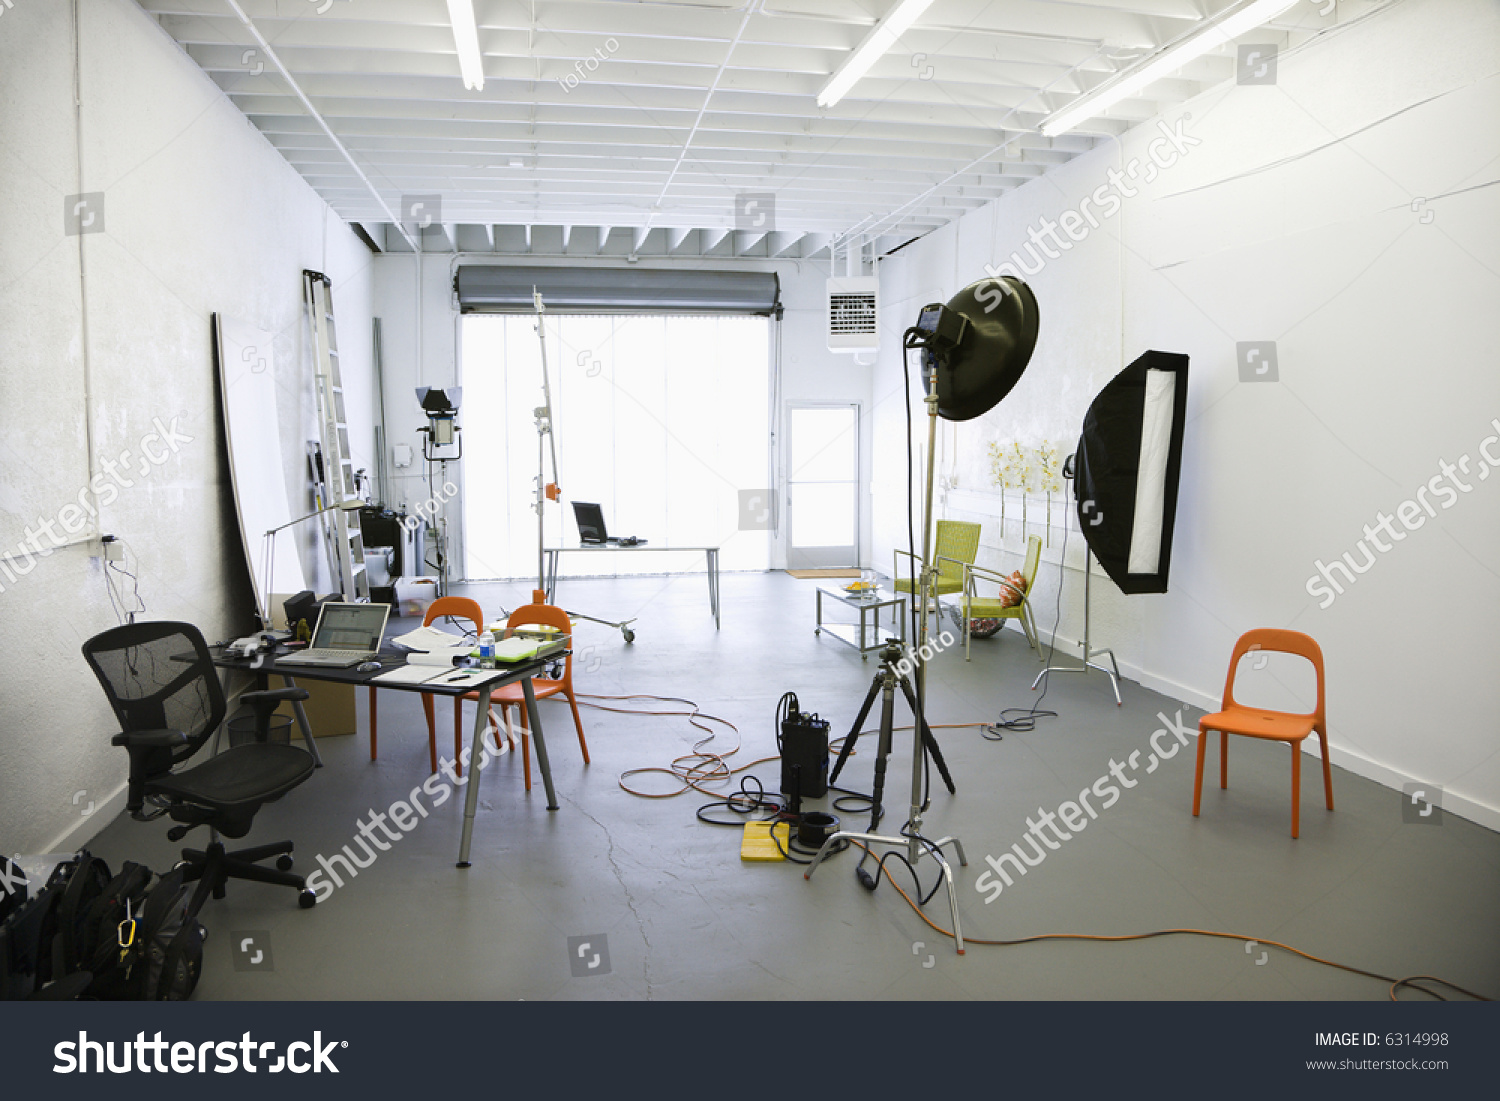 Interior Of Photography Studio With Lights And Various ...